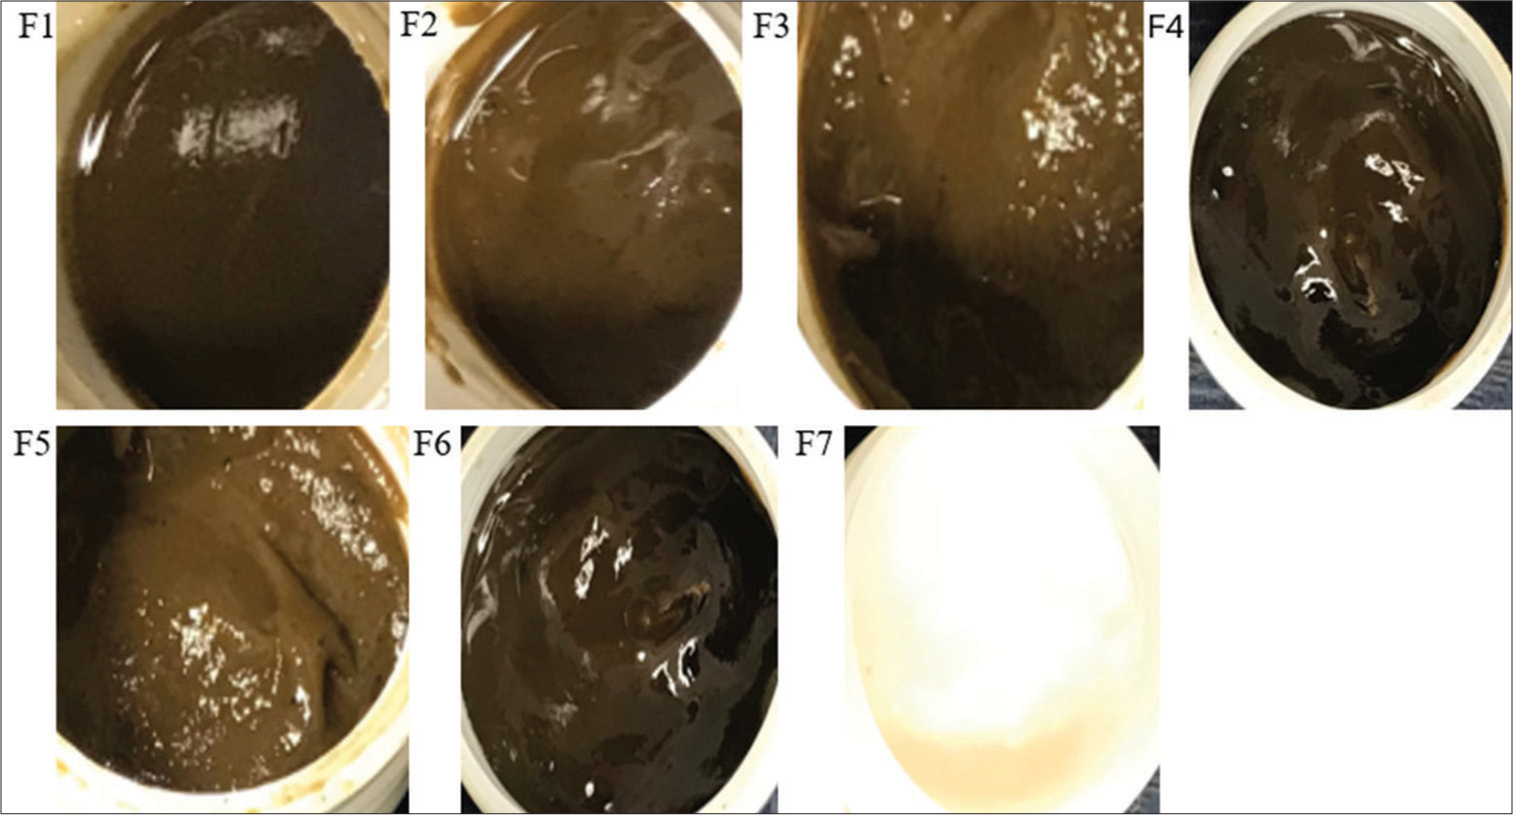 Development of emulgel formulation from Markhamia tomentosa leaf extract: Characterization and in vitro antimicrobial activity against skin isolates